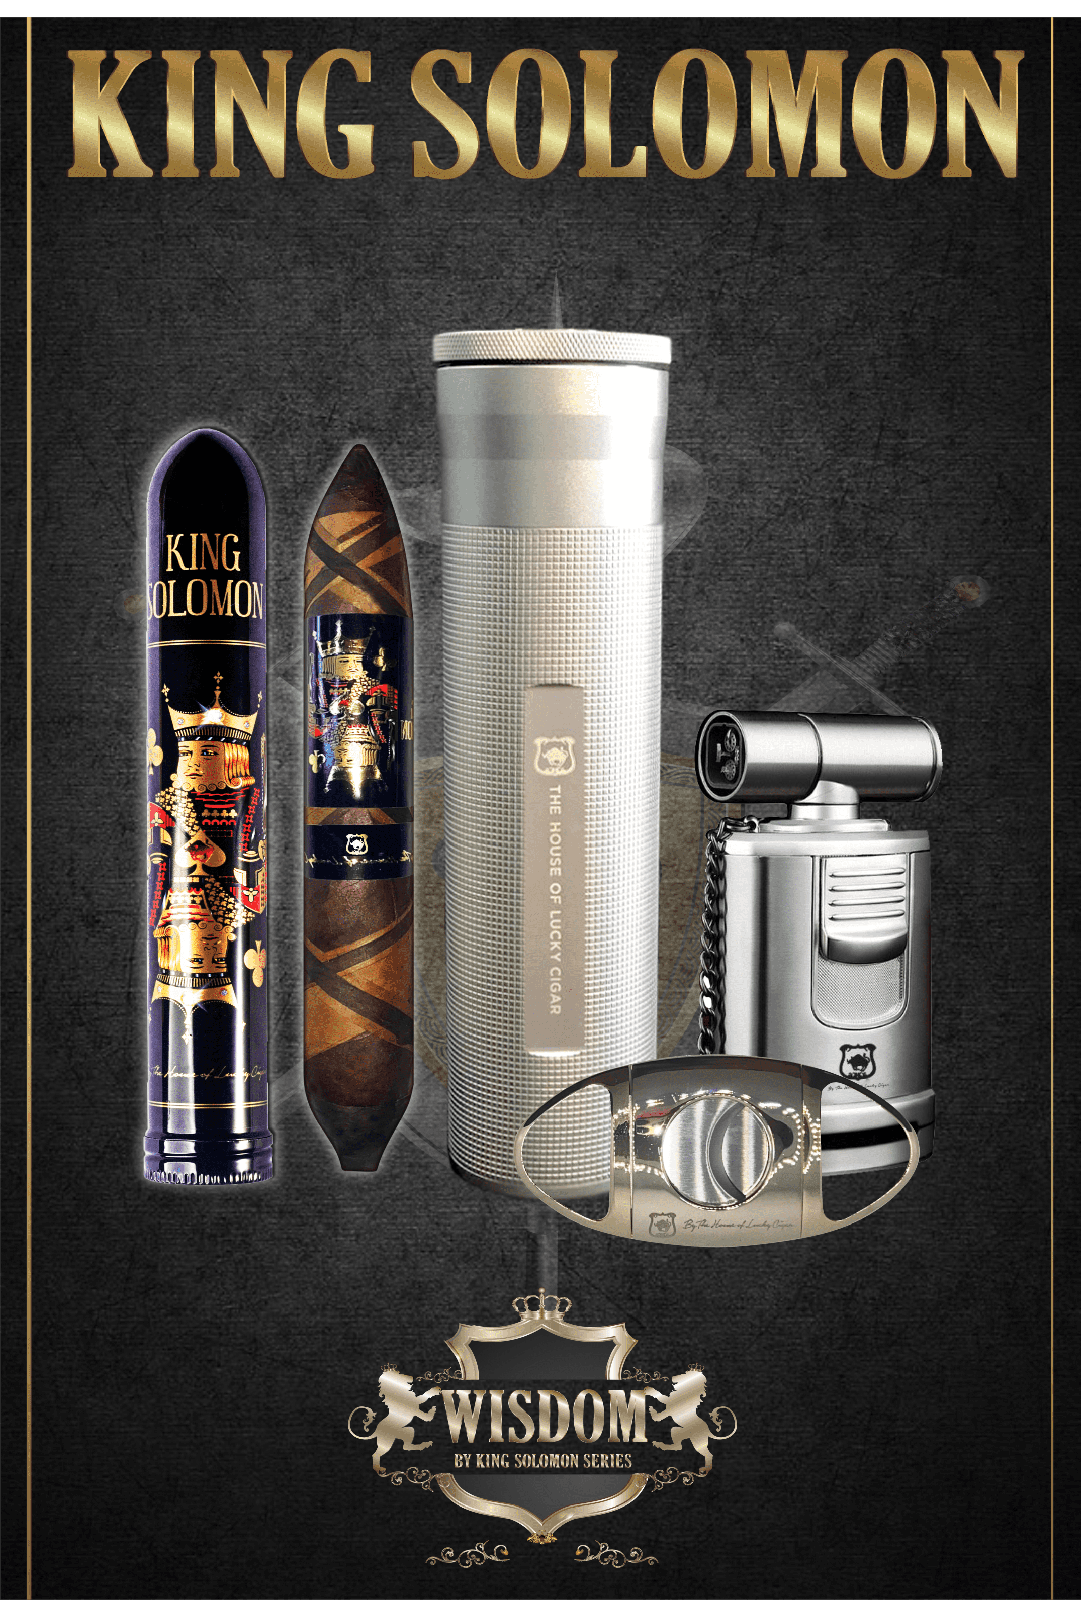 From The King Solomon Series: 1 Solomon 7x60 Cigars with Travel Humidor, Cutter, Gun Torch Set